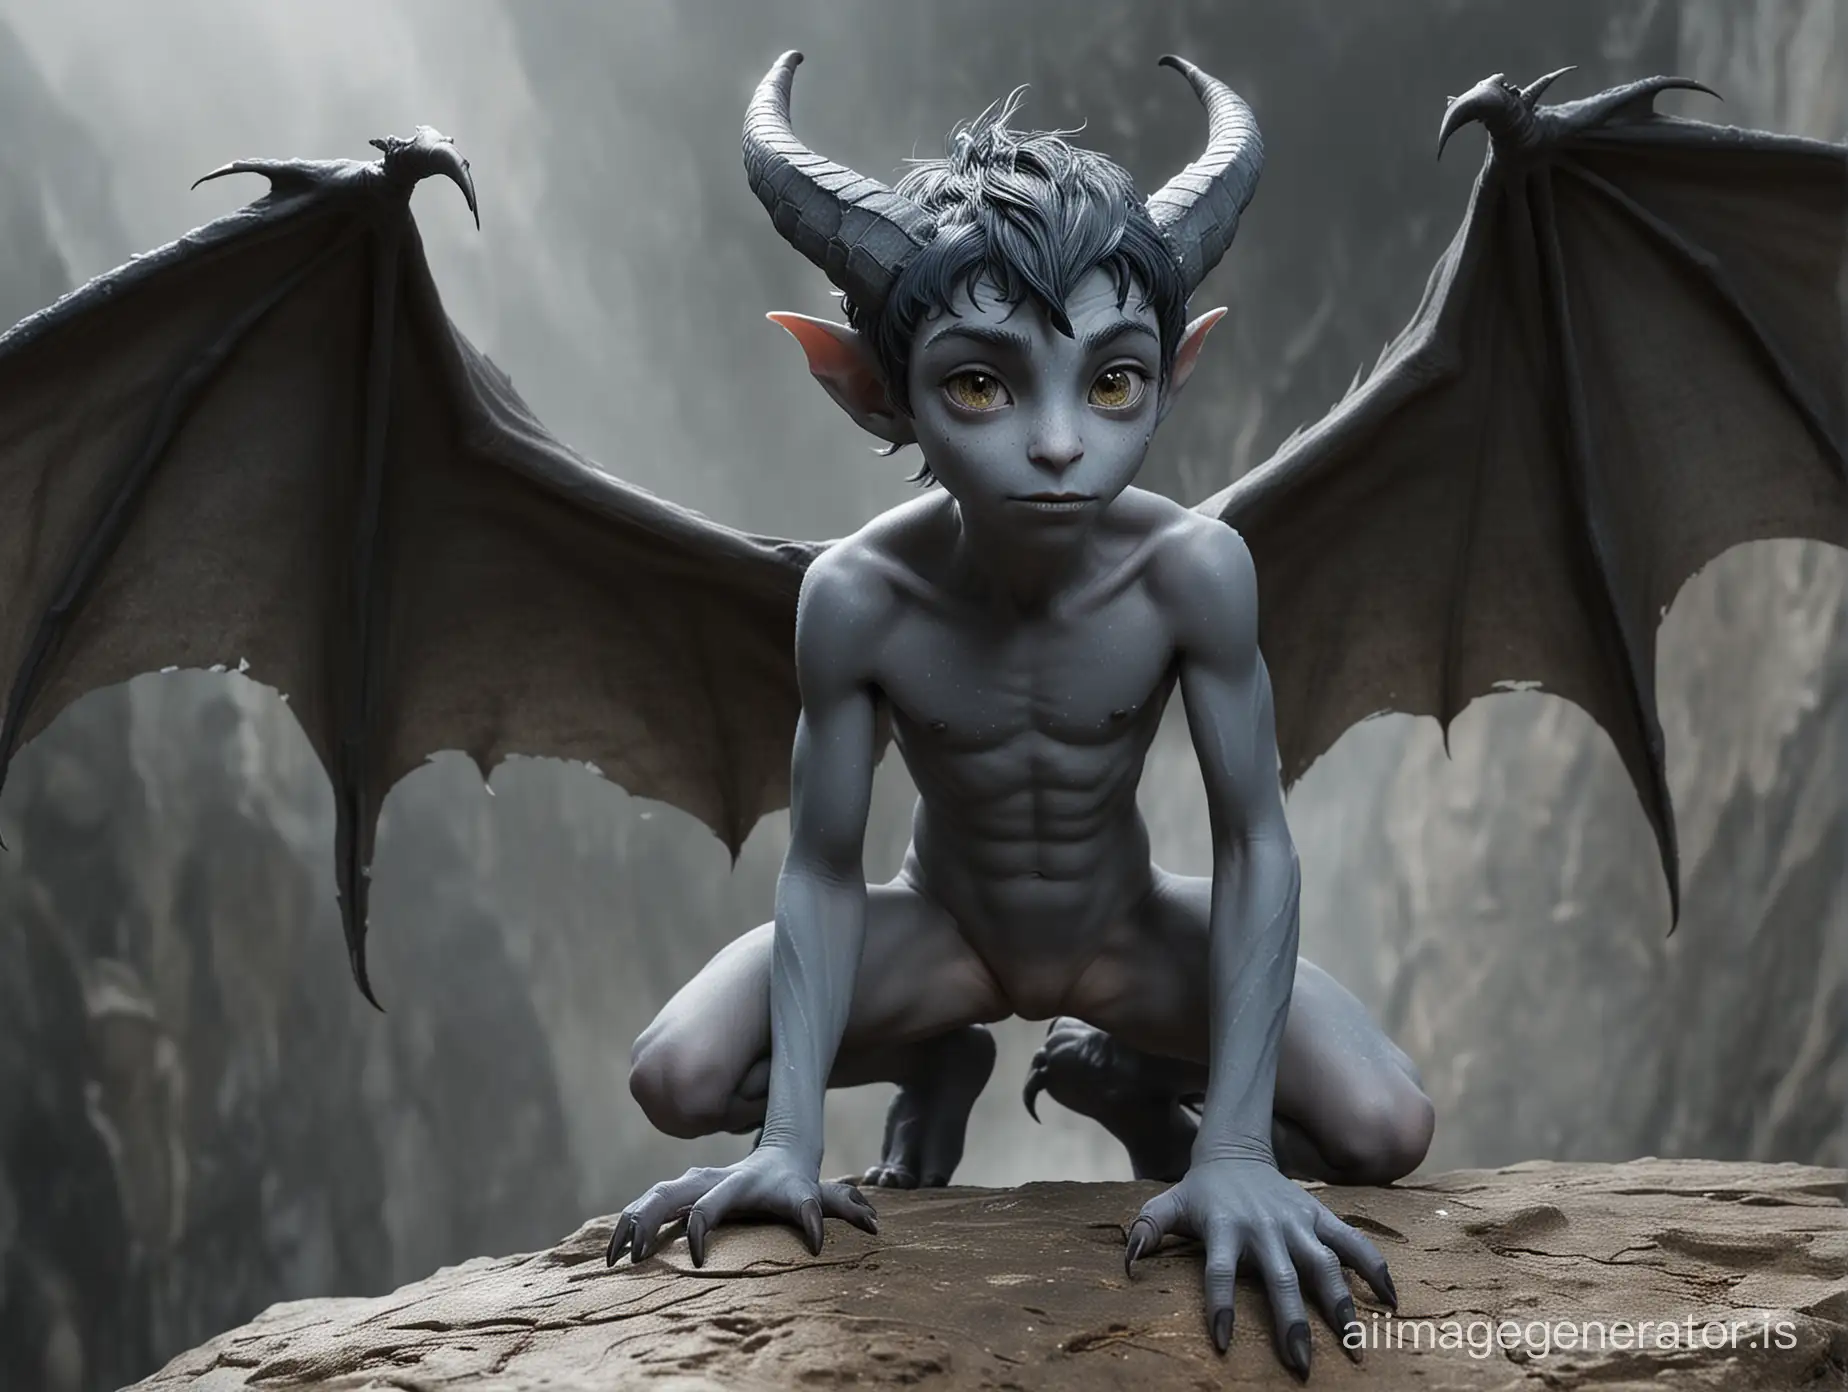 A nude Teenboy with very smooth gray-blue skin and some freckles. He has bat-like wings and a Tail. He is skinny. He has pointet ears. He has dark hair. He has claws instead of fingers and toes. He has animal-like feet. Two natural sharp horns growing from his forehead. He stands on a Rock in a dark cloudy Night like a Gargoyle. Show the entire boy in a long shot.